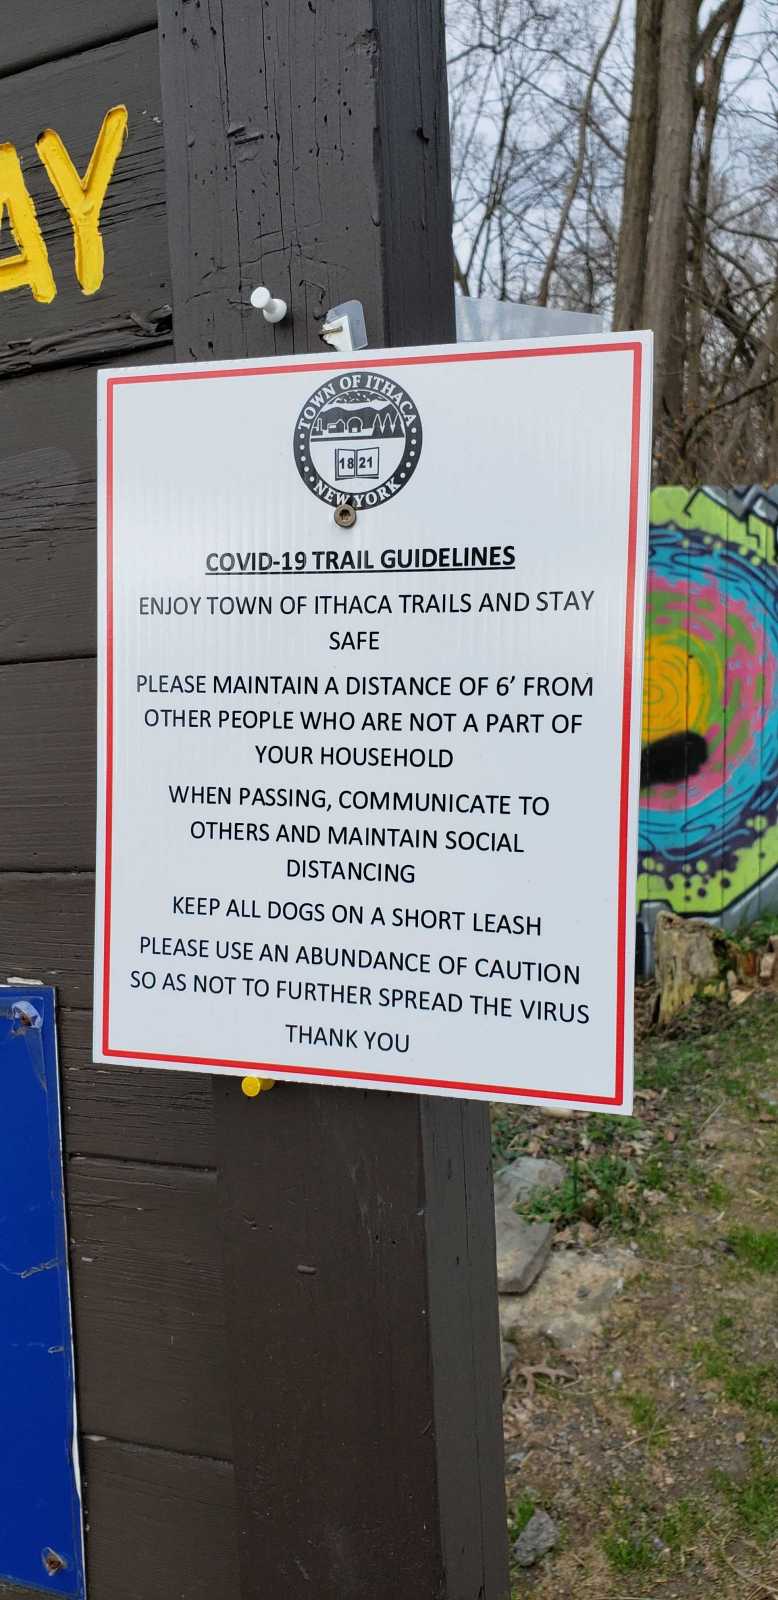 Covid-19 Trail Guidelines